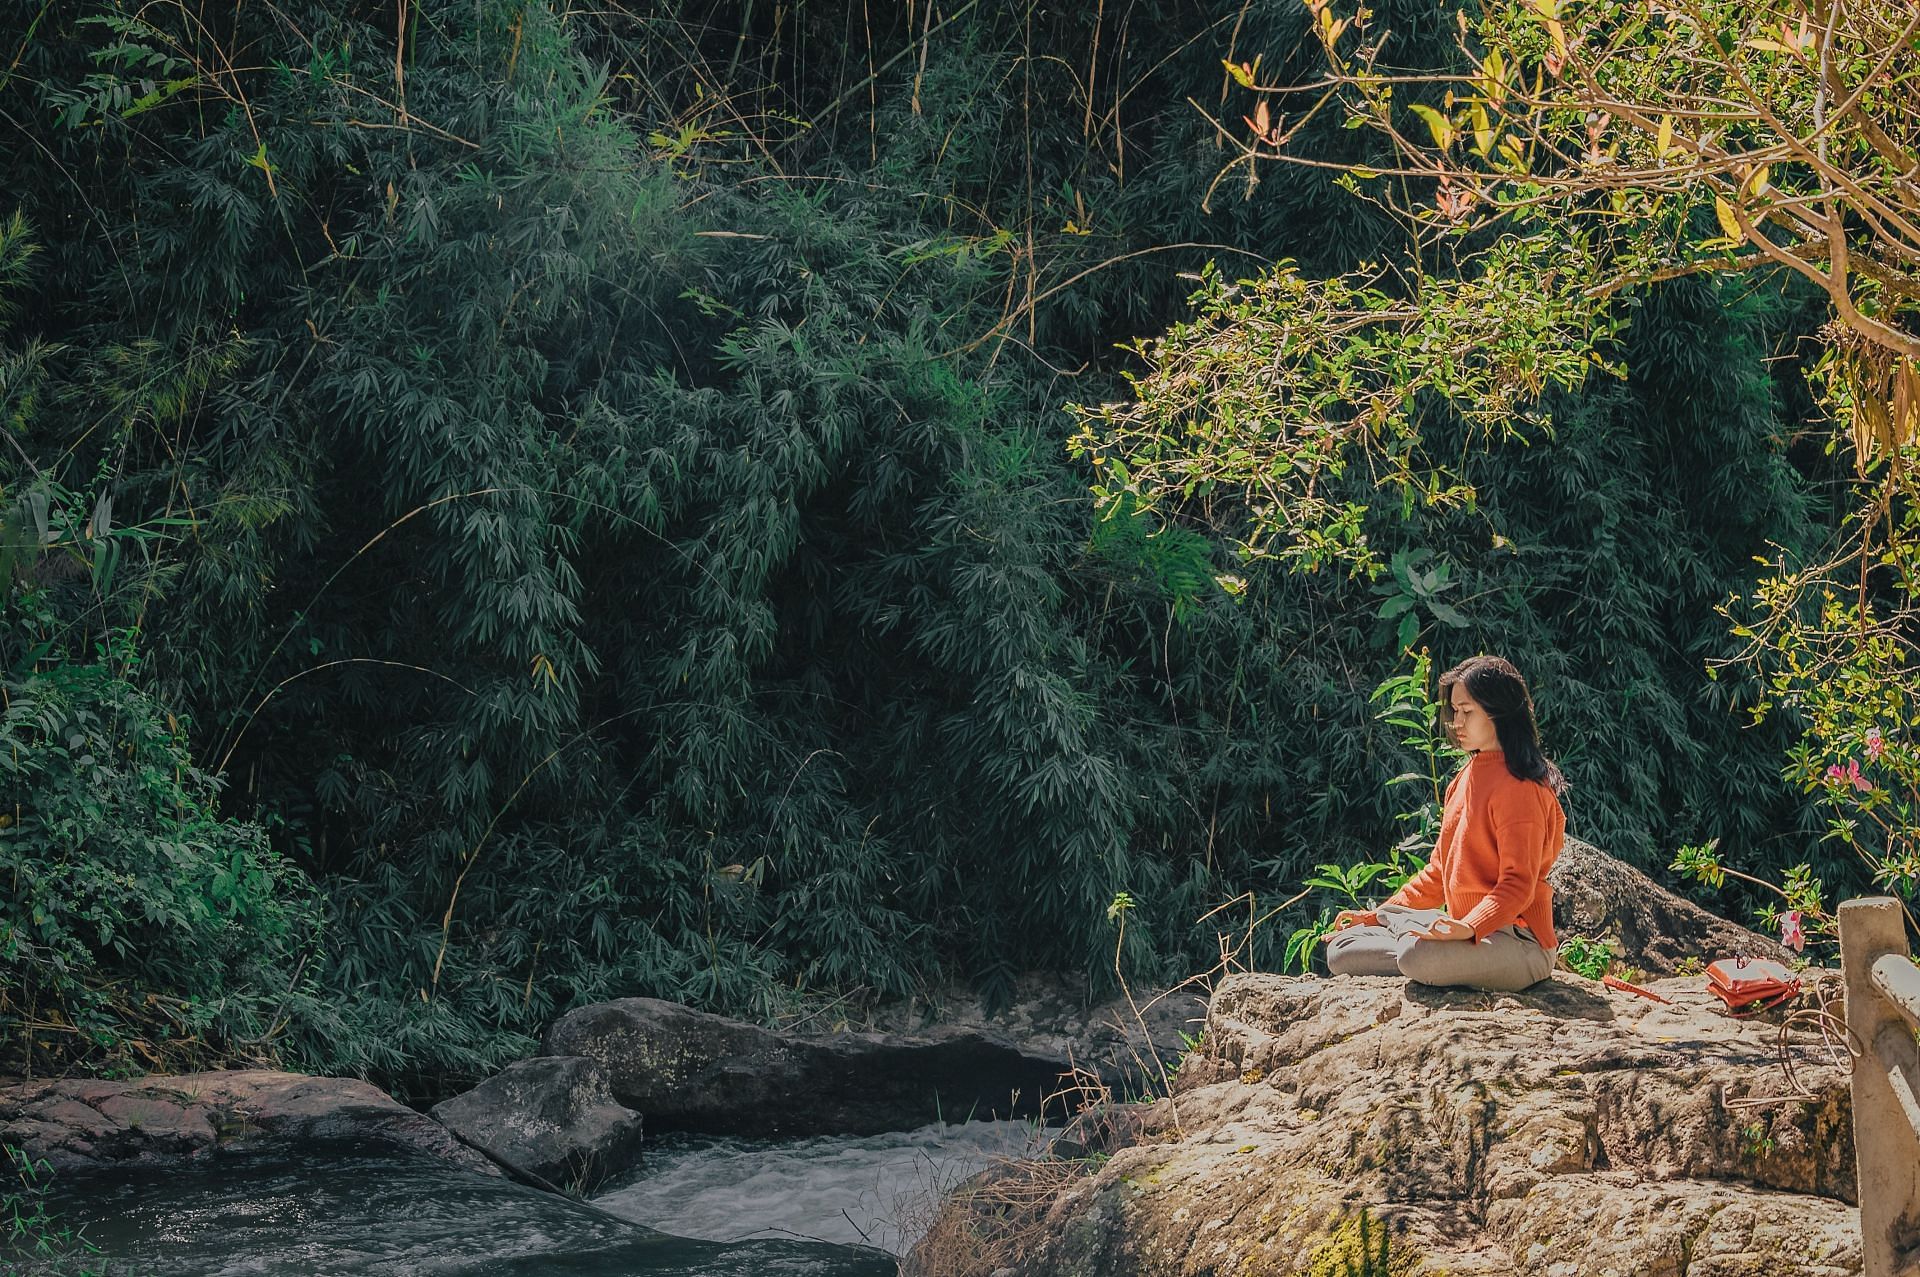 Yoga is one pathway to let go off stress. (Photo by Pexels/ Min An)